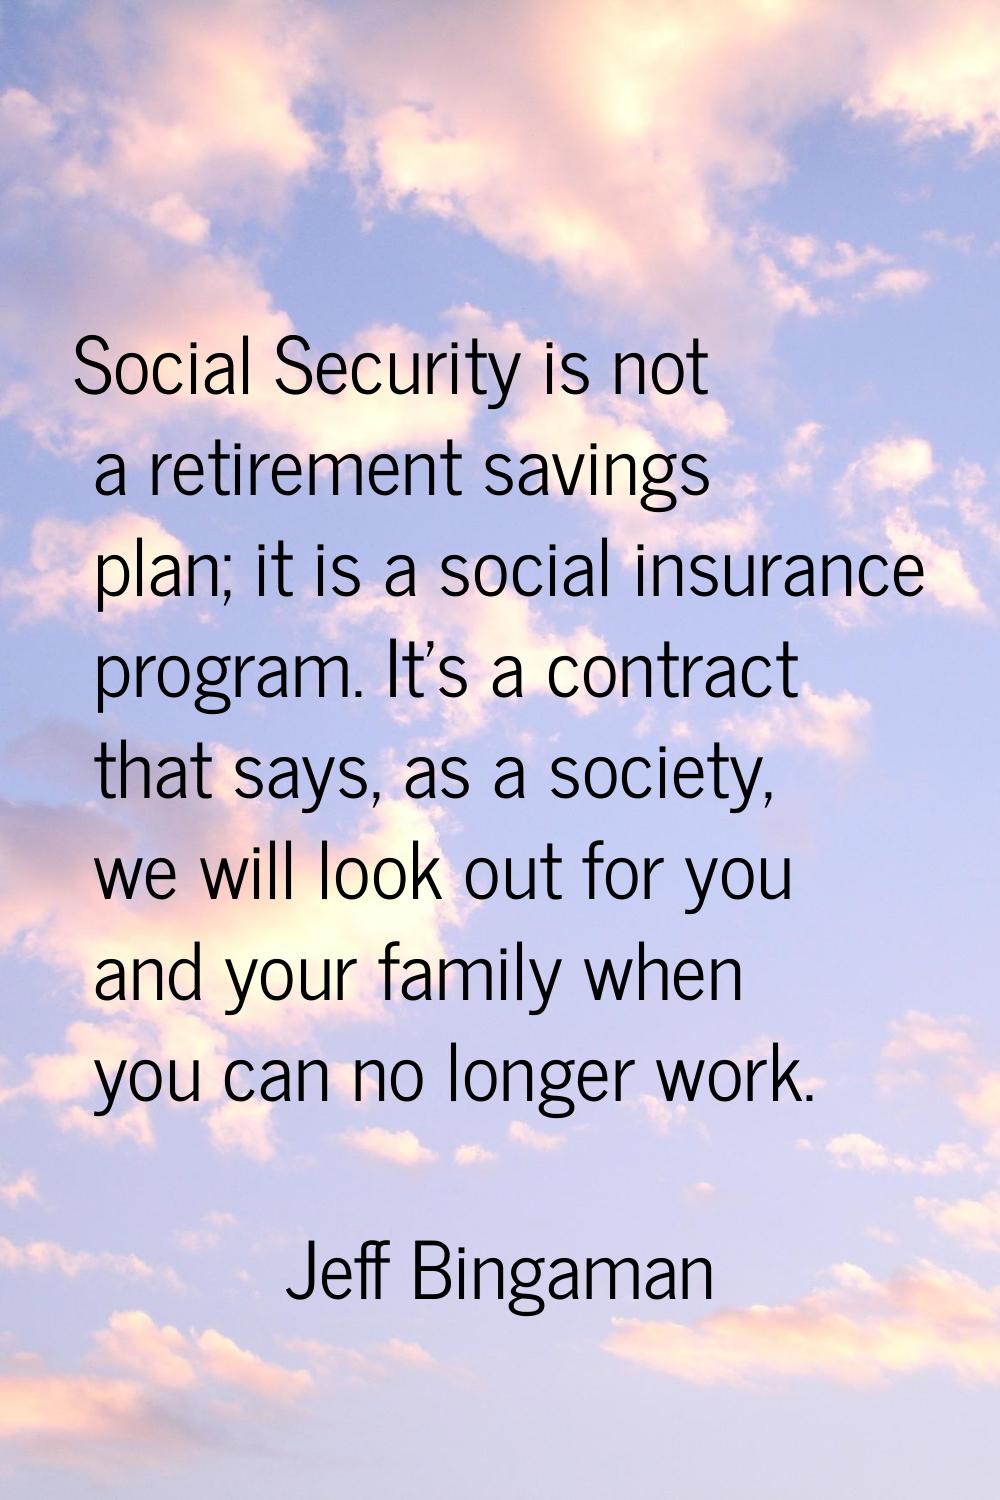 Social Security is not a retirement savings plan; it is a social insurance program. It's a contract